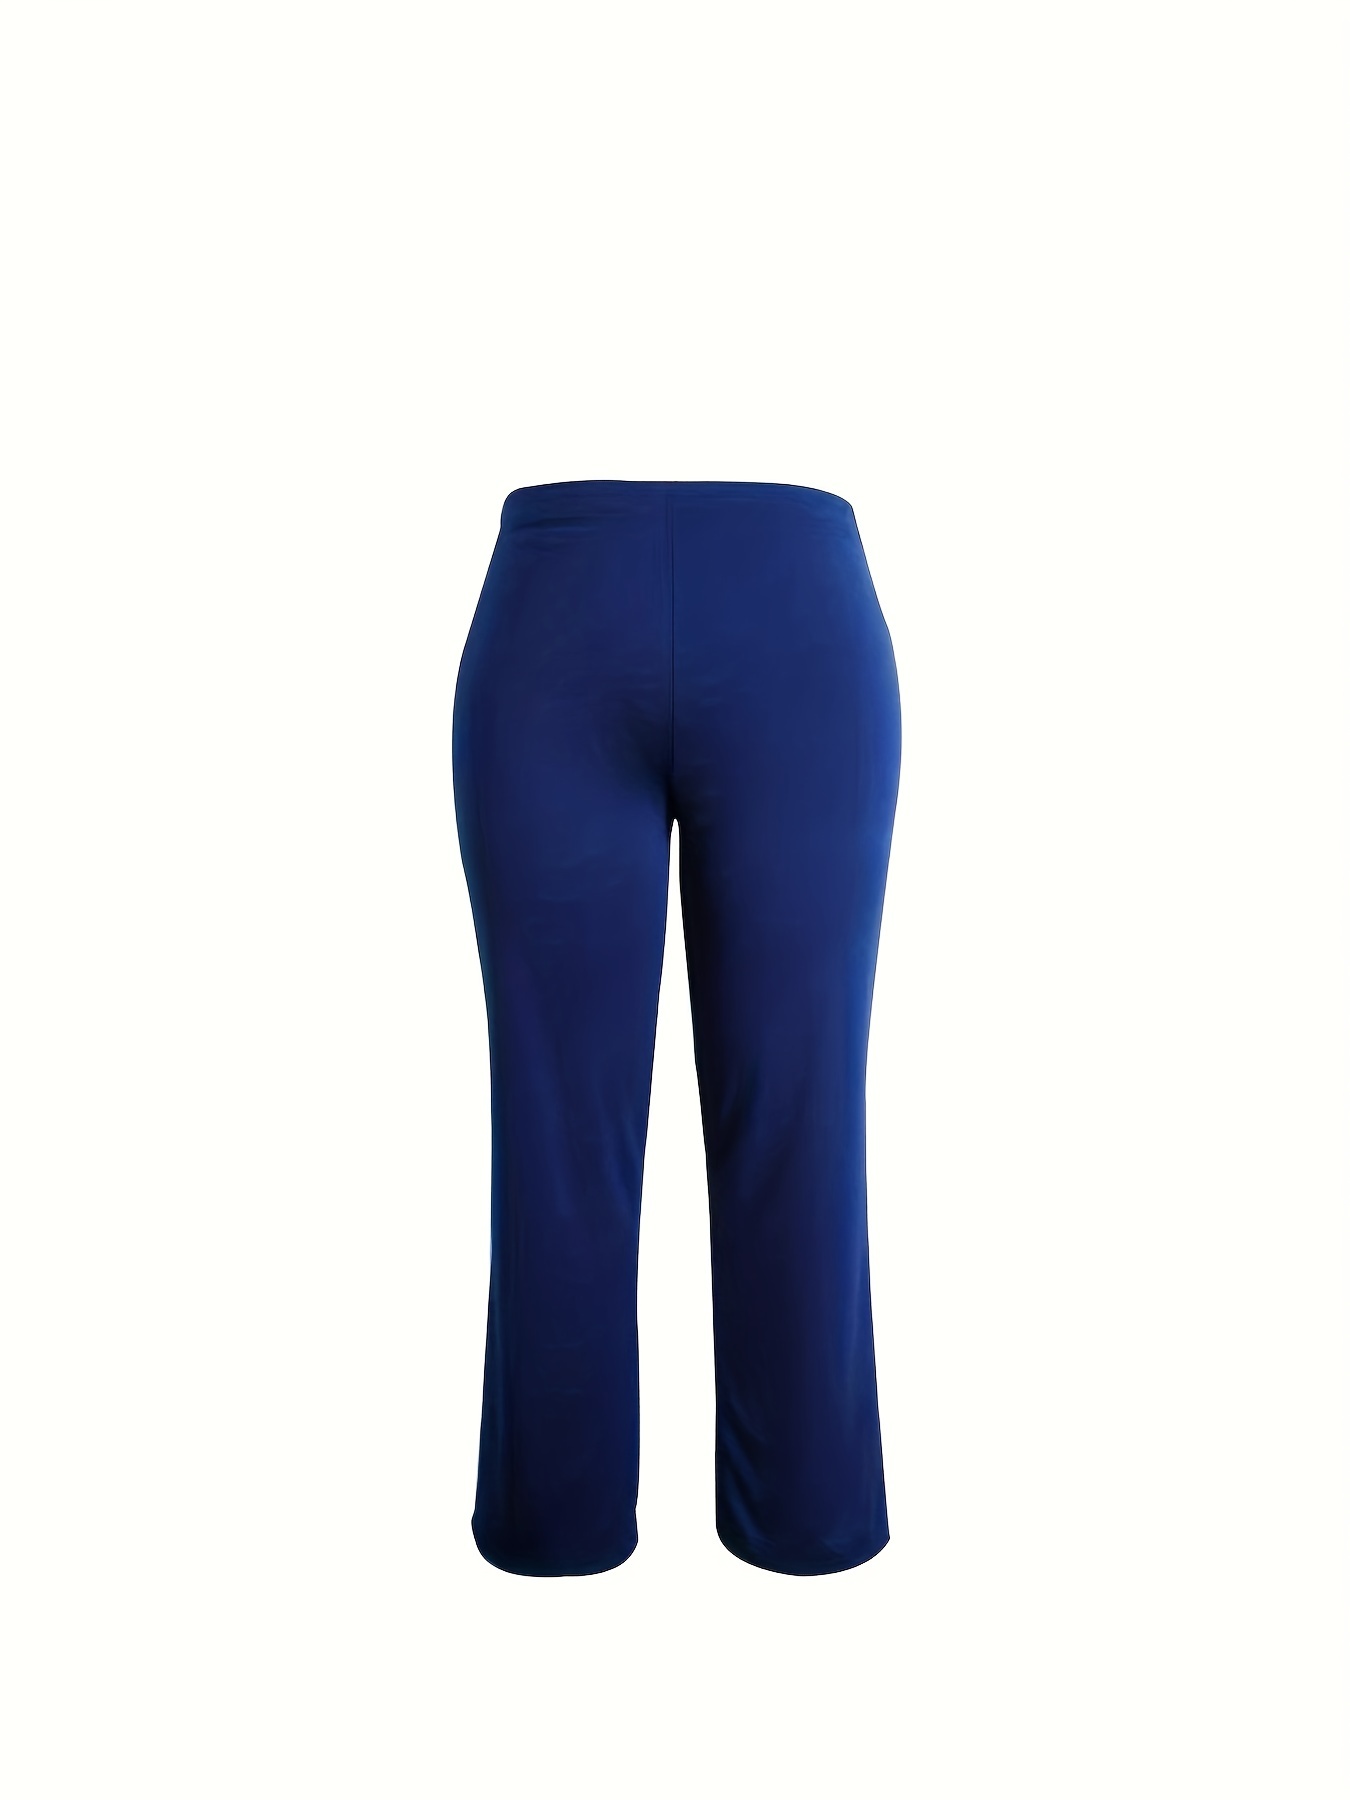 Buy Womens's Stretch Work Pants & Stretchable Pants